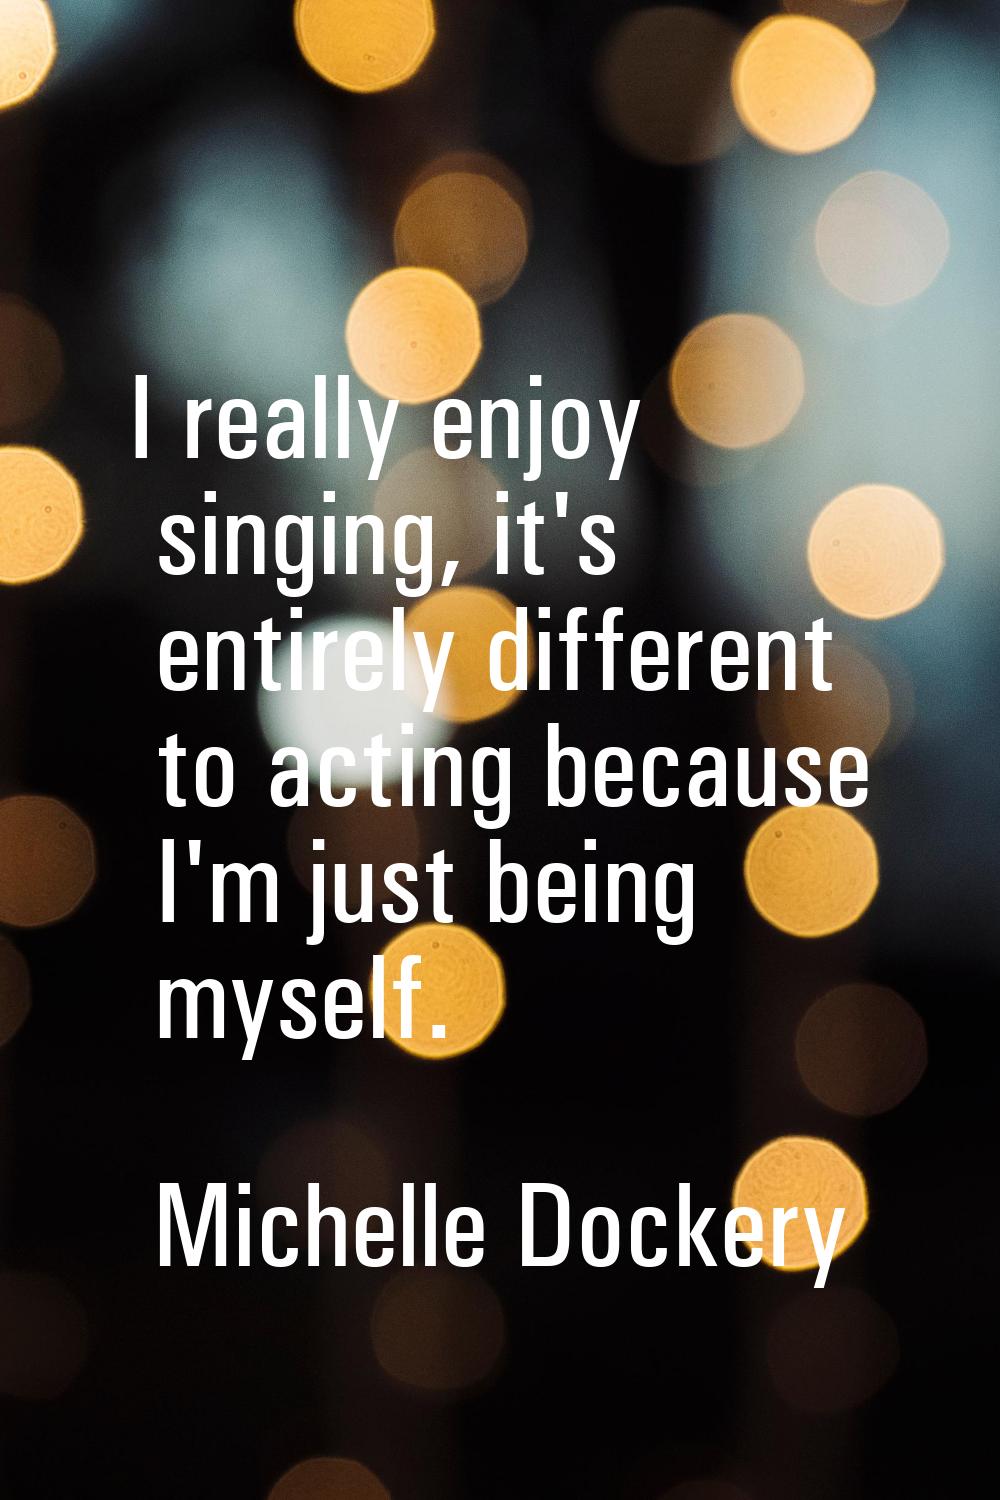 I really enjoy singing, it's entirely different to acting because I'm just being myself.